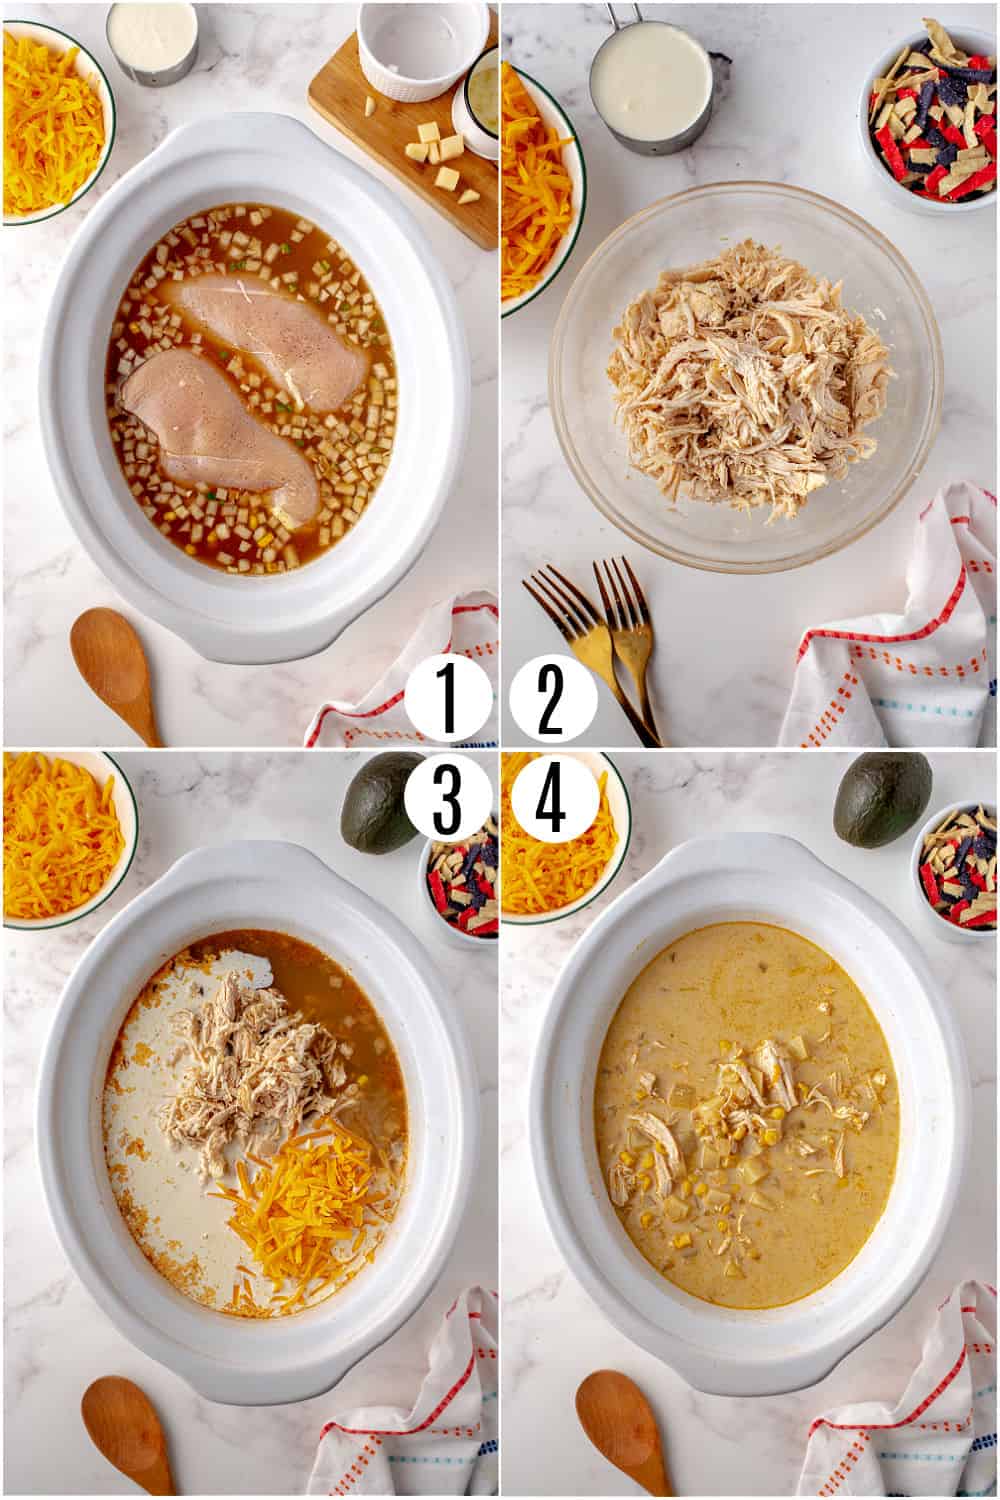 Step by step photos showing how to make chicken corn chowder.